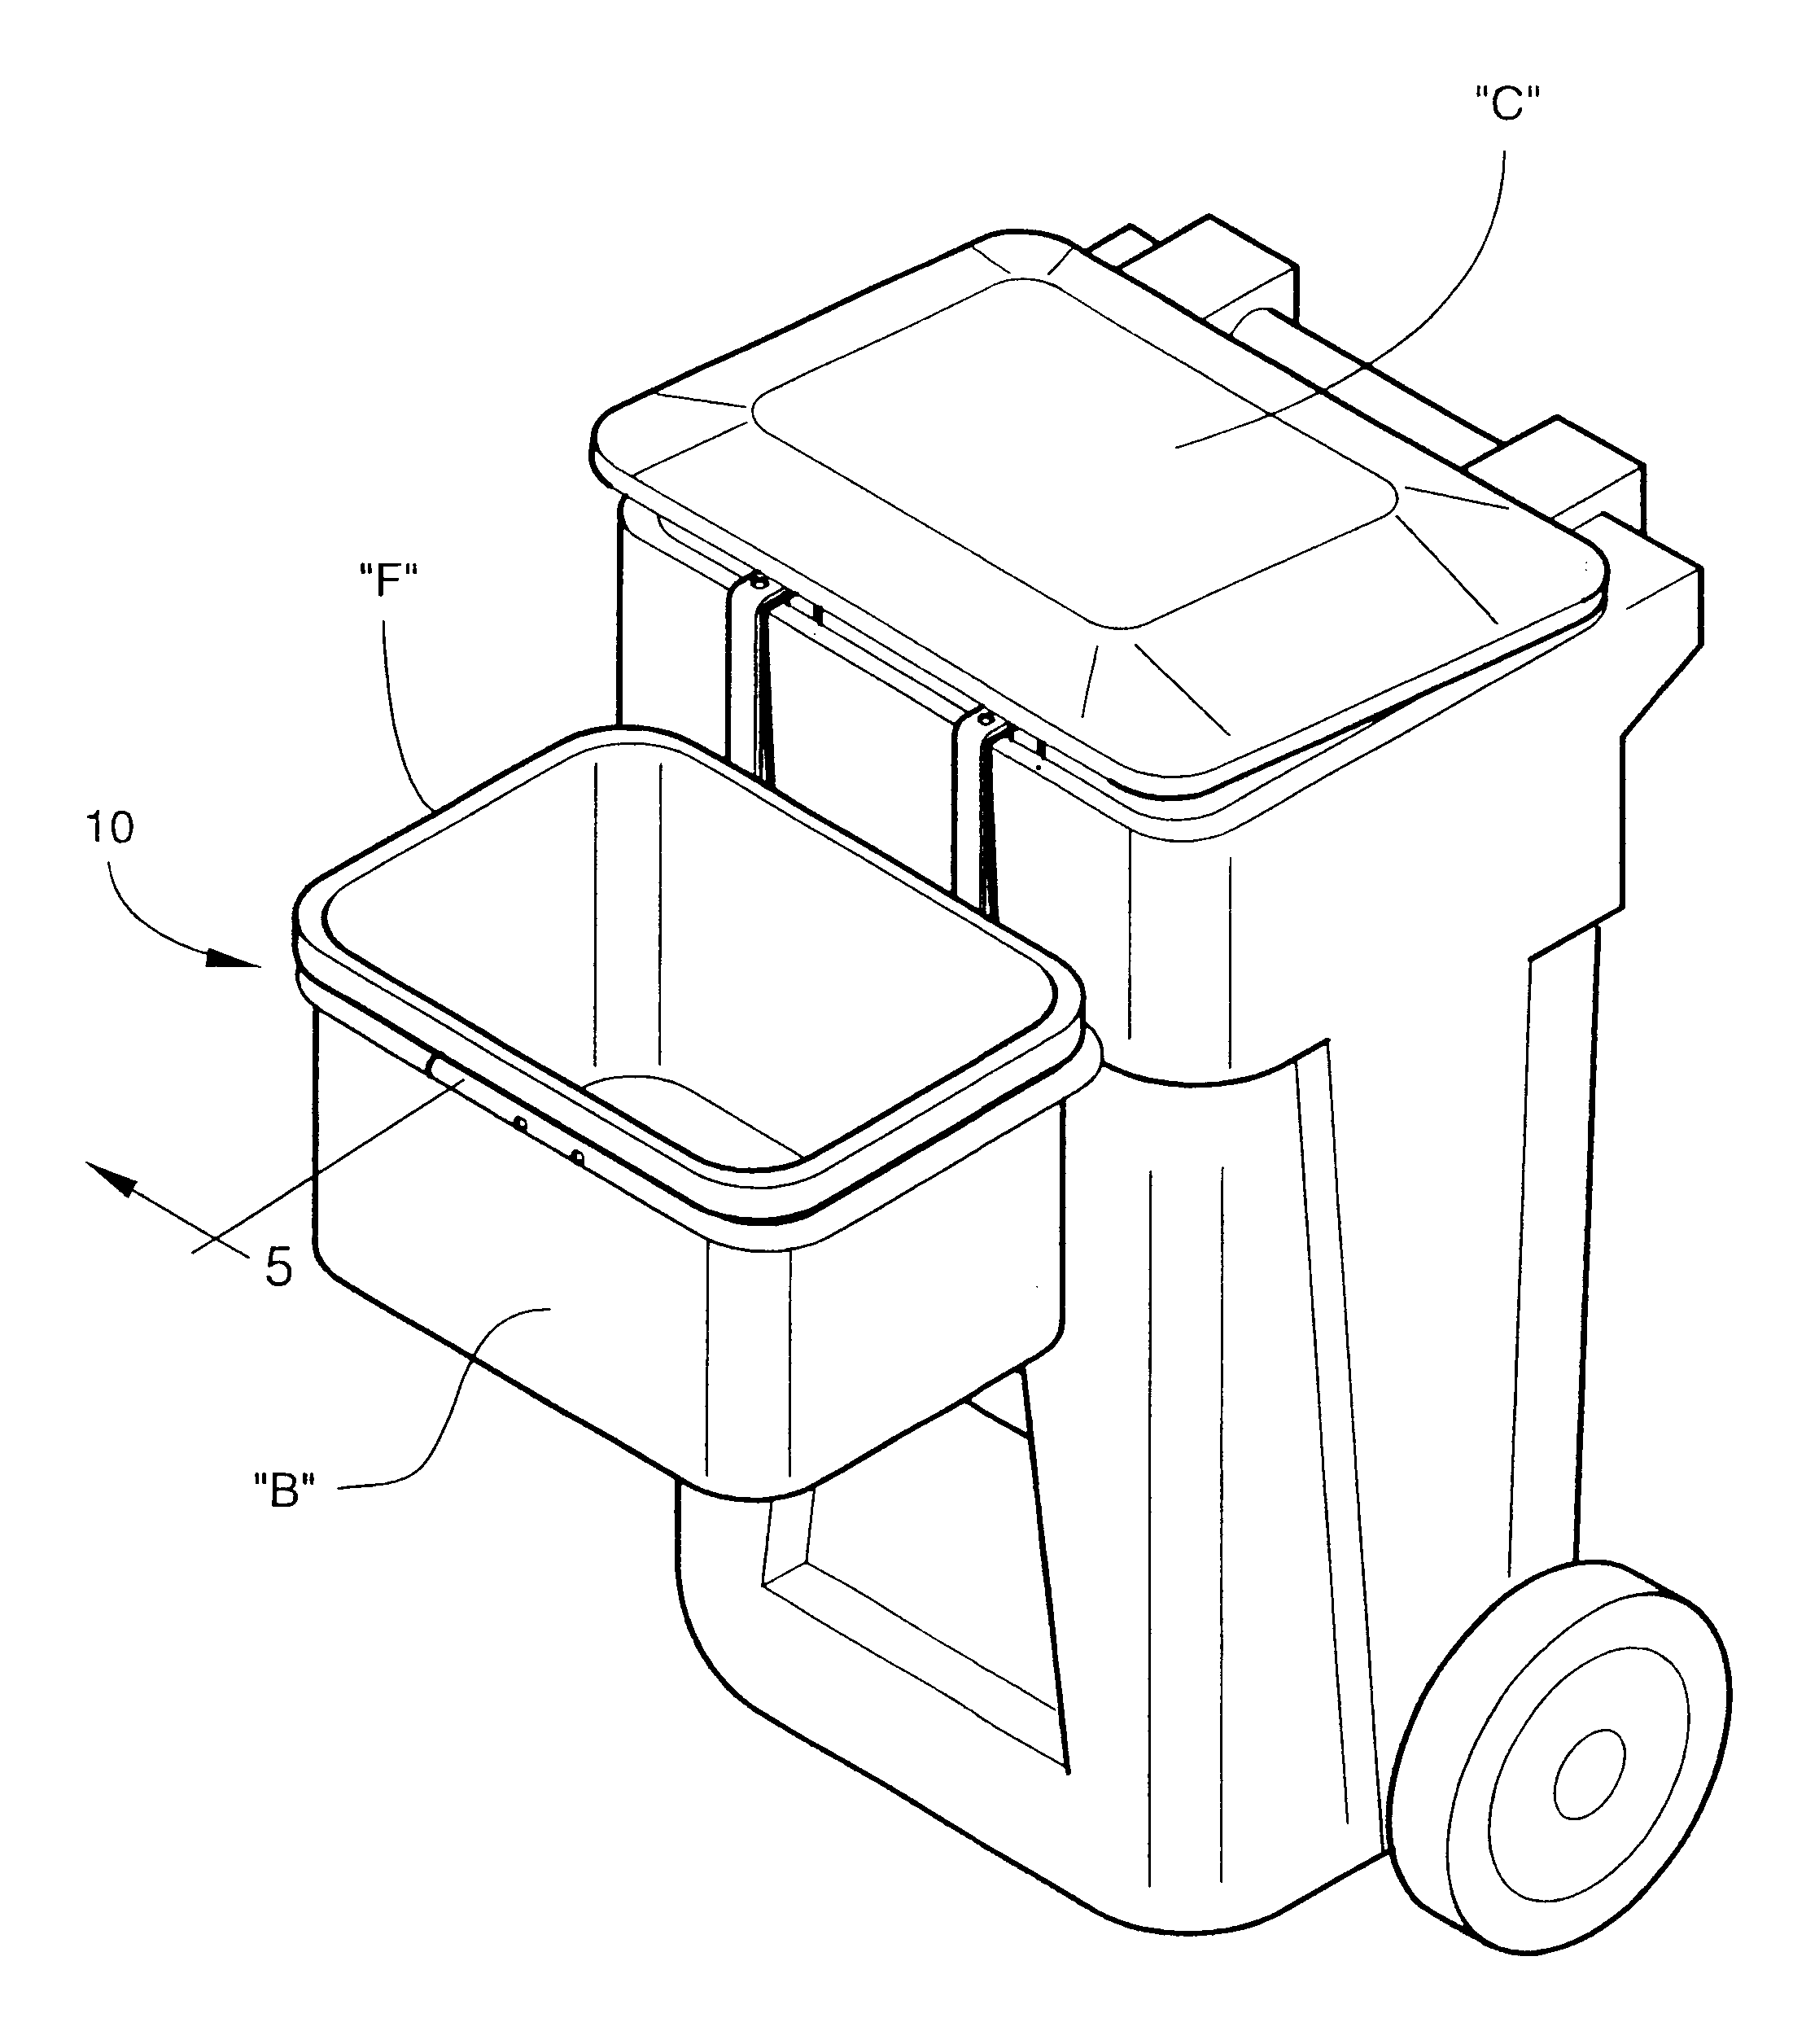 Bin Carrier attachment for a portable waste container